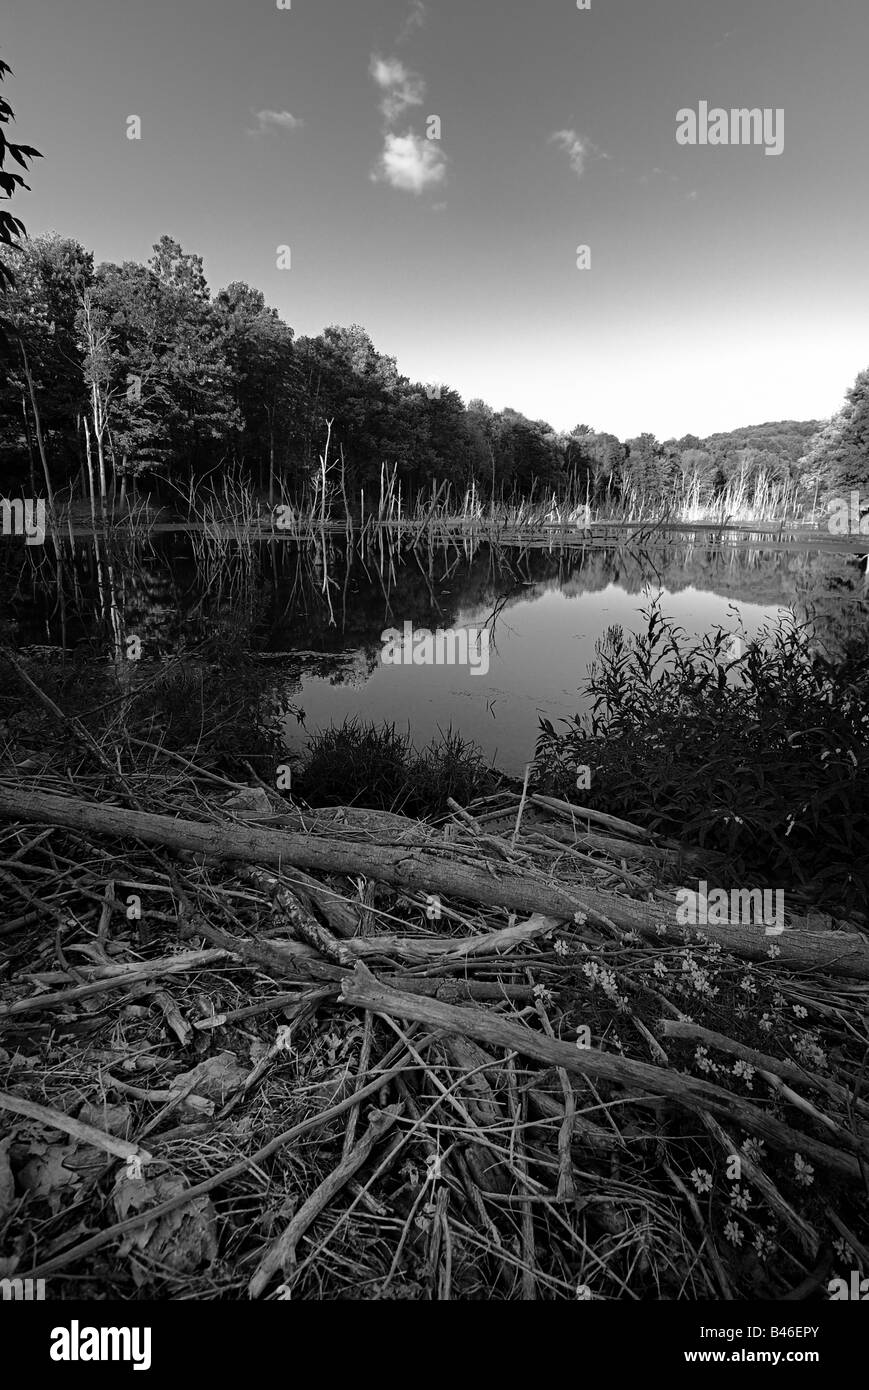 A small lake with hundreds of protruding branches at Moraine State Park, Pennsylvania. Stock Photo